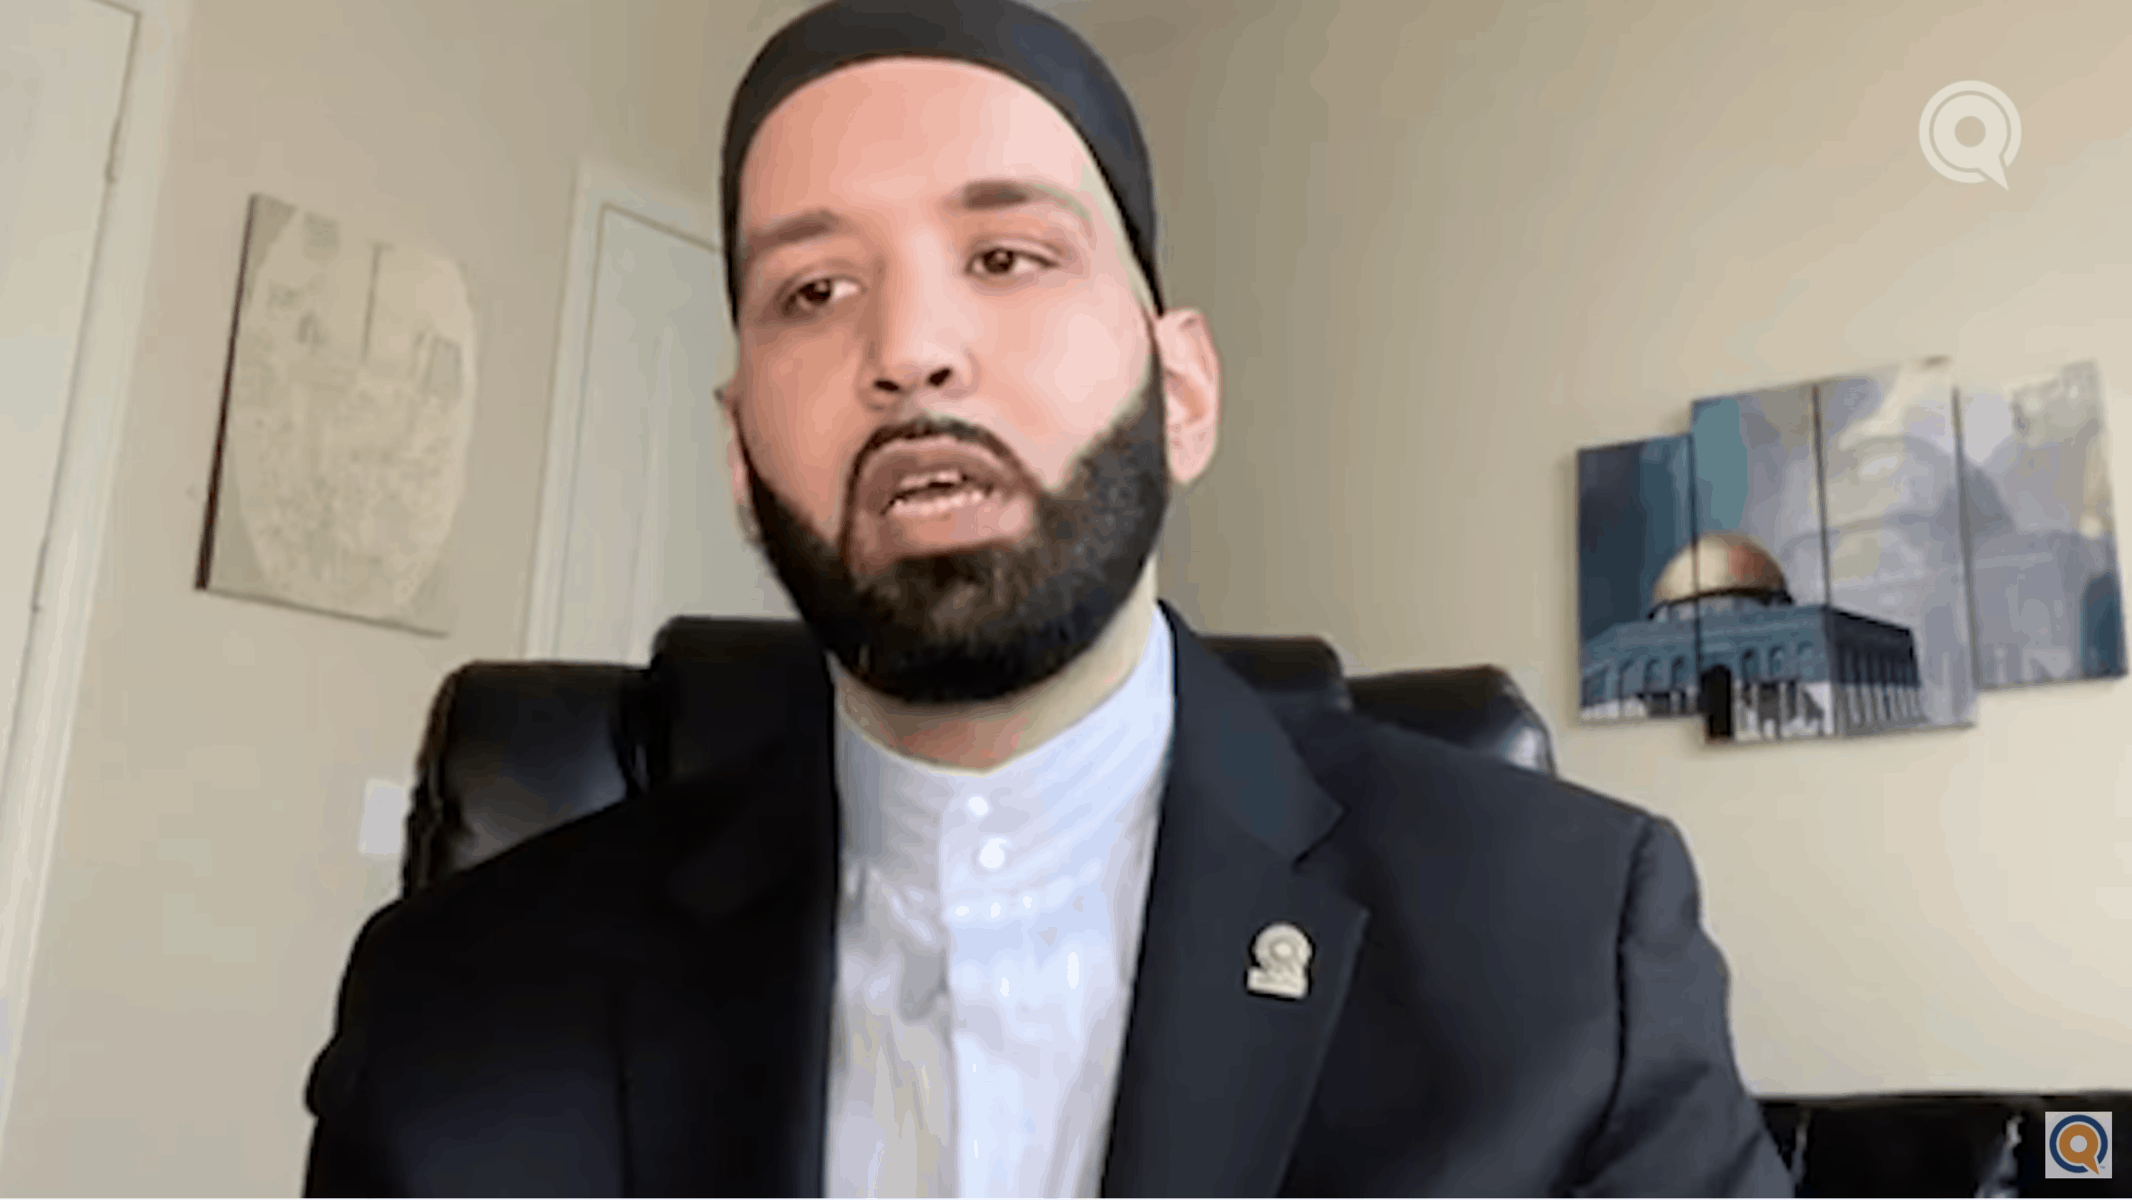 Omar Suleiman – “Do not leave me to myself”